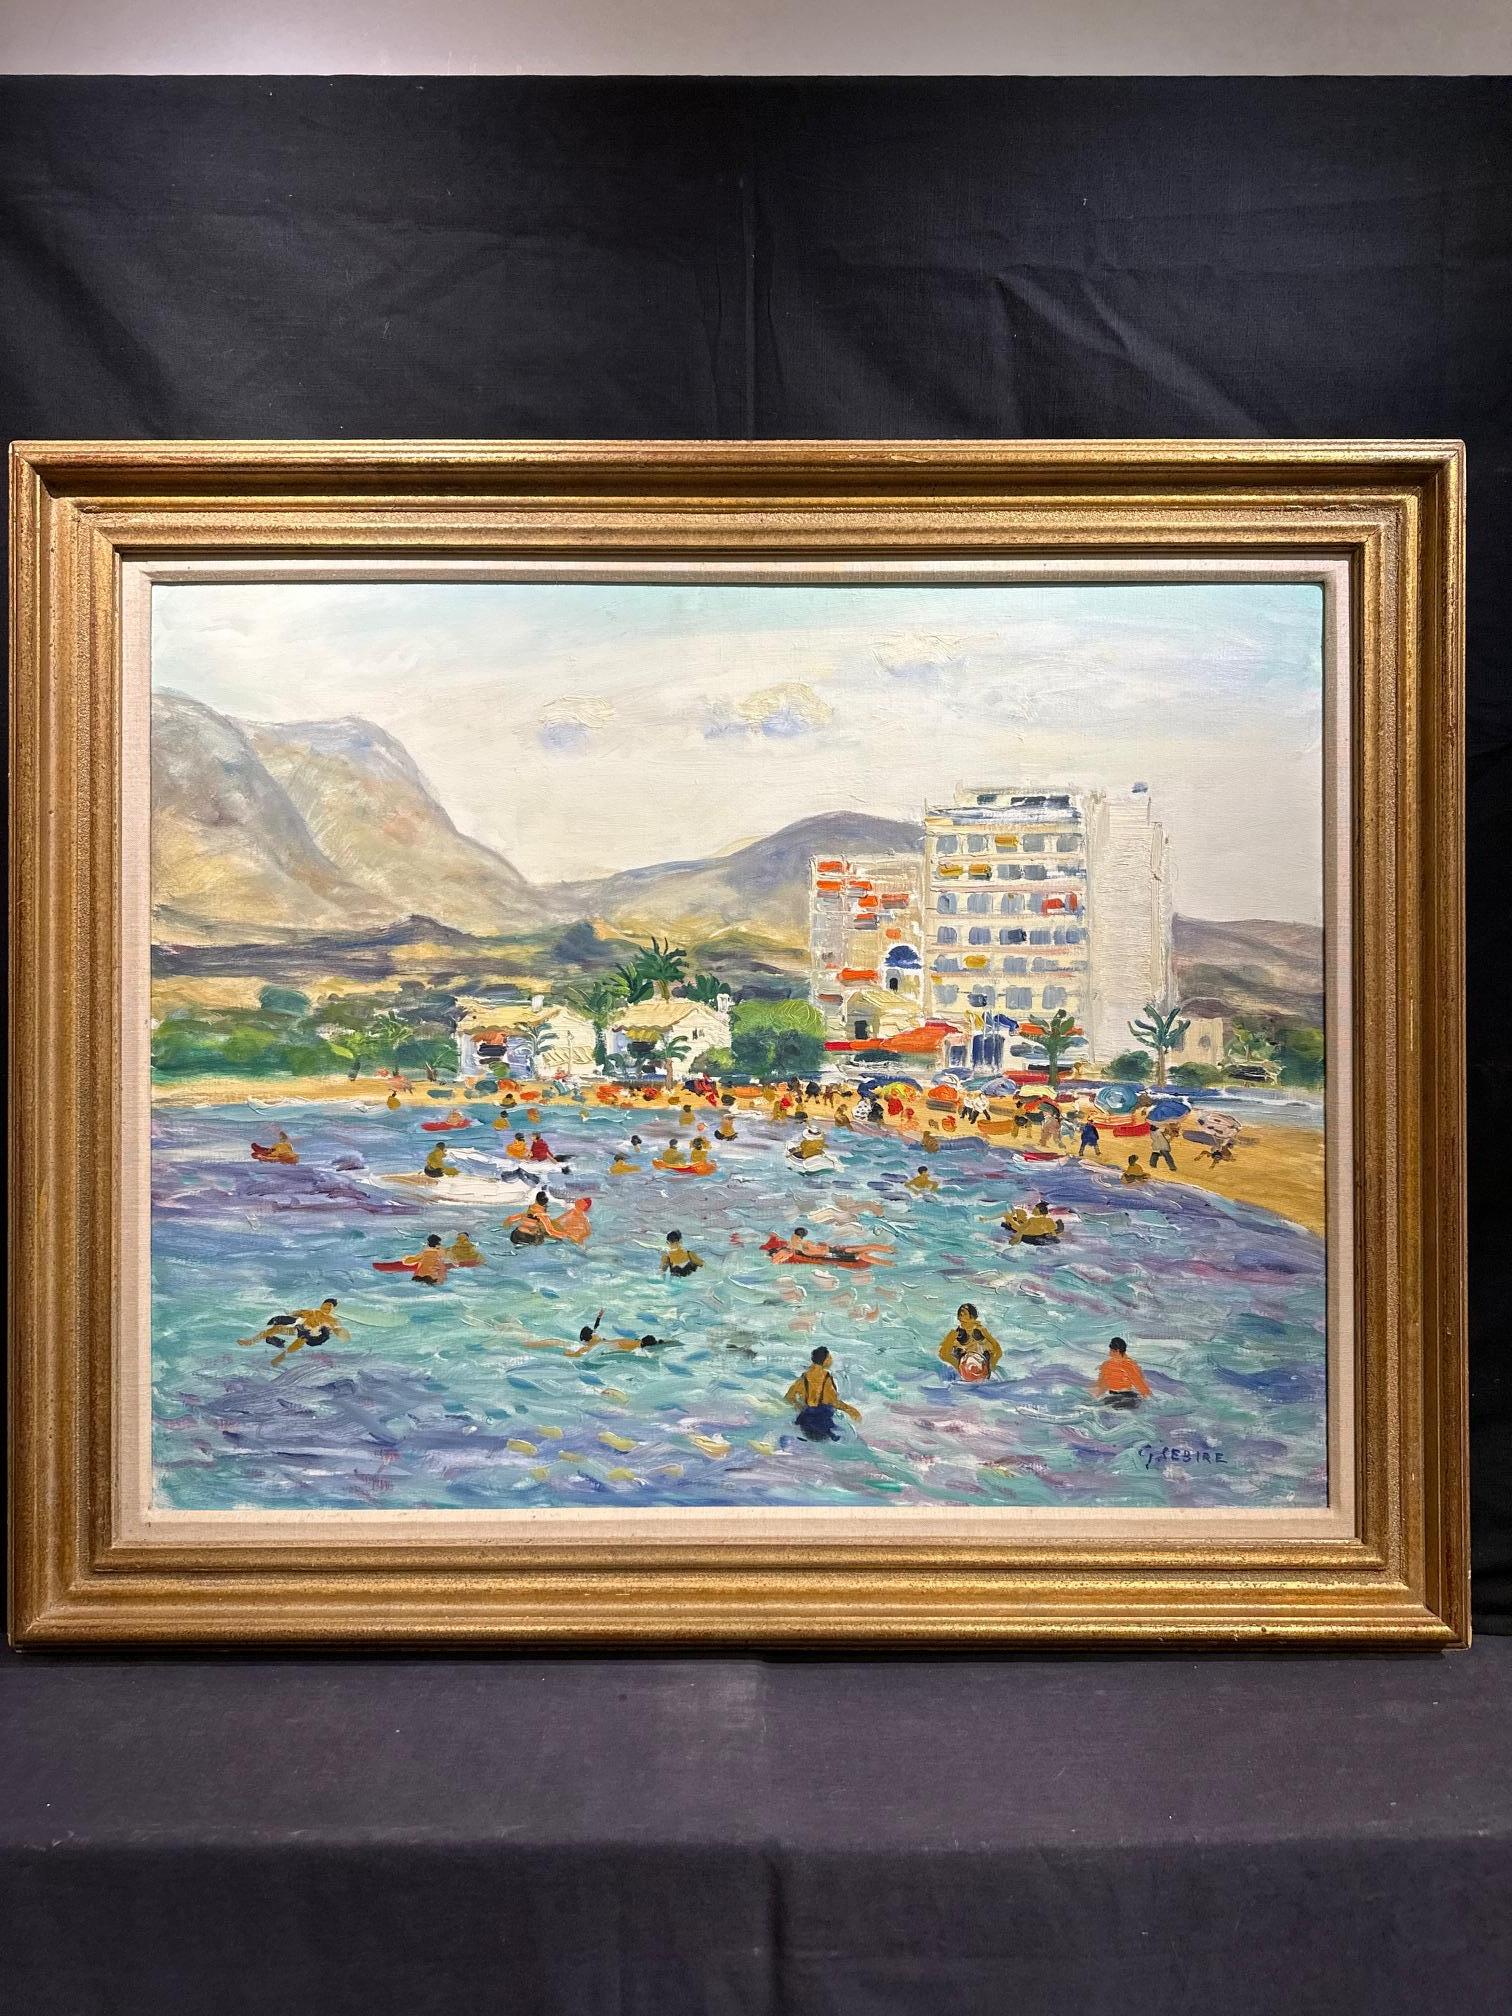 A Day at the Beach - Impressionist Painting by Gaston Sebire